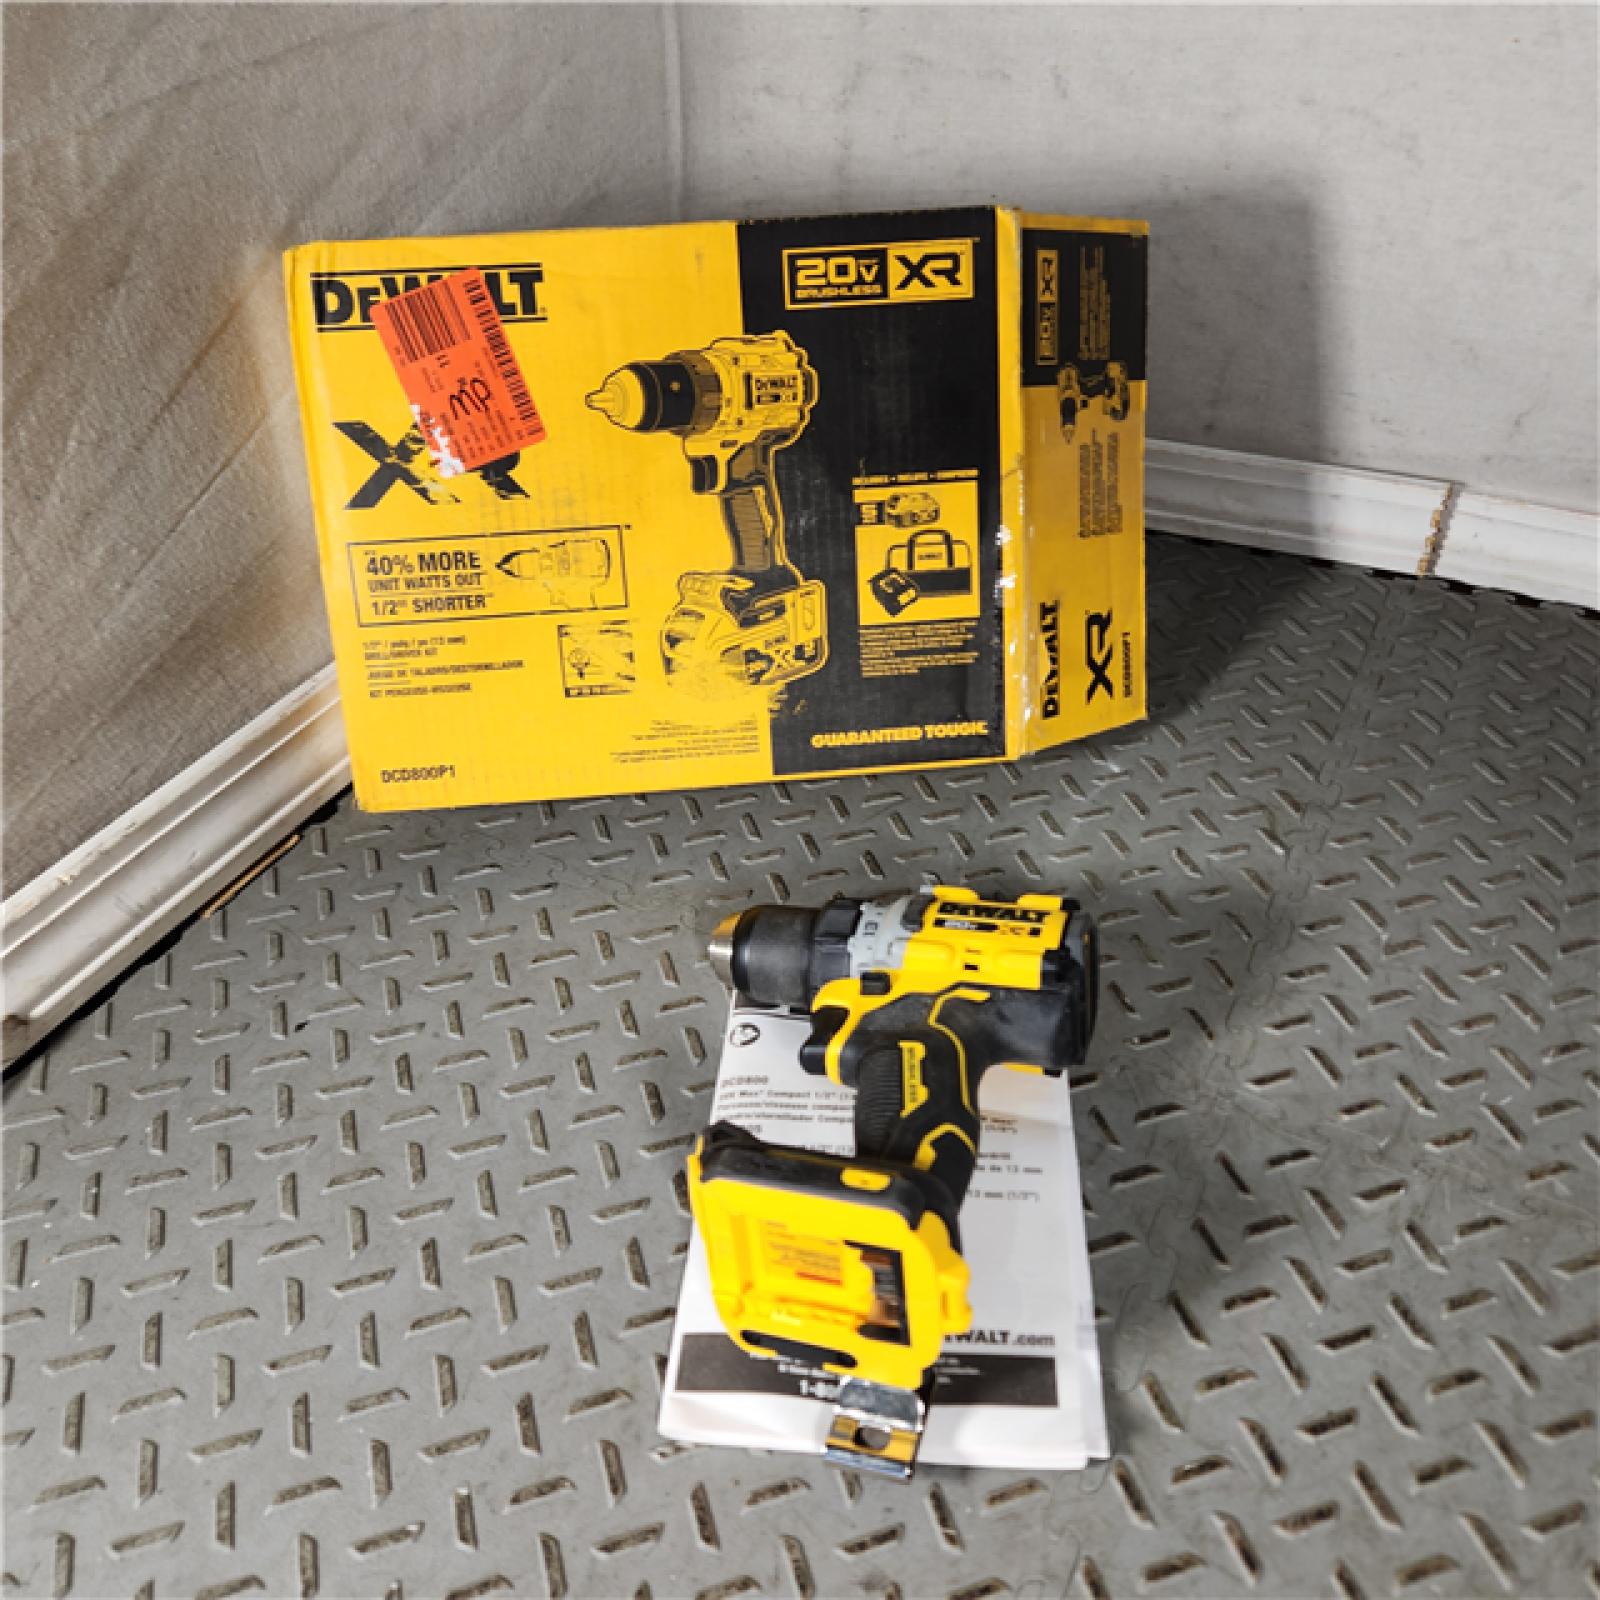 Houston Location - AS-IS DEWALT DCD800P1 20V MAX* XR Brushless Cordless Lithium-Ion 1/2 Drill/Driver KIT 5.0AH - Appears IN LIKE NEW Condition